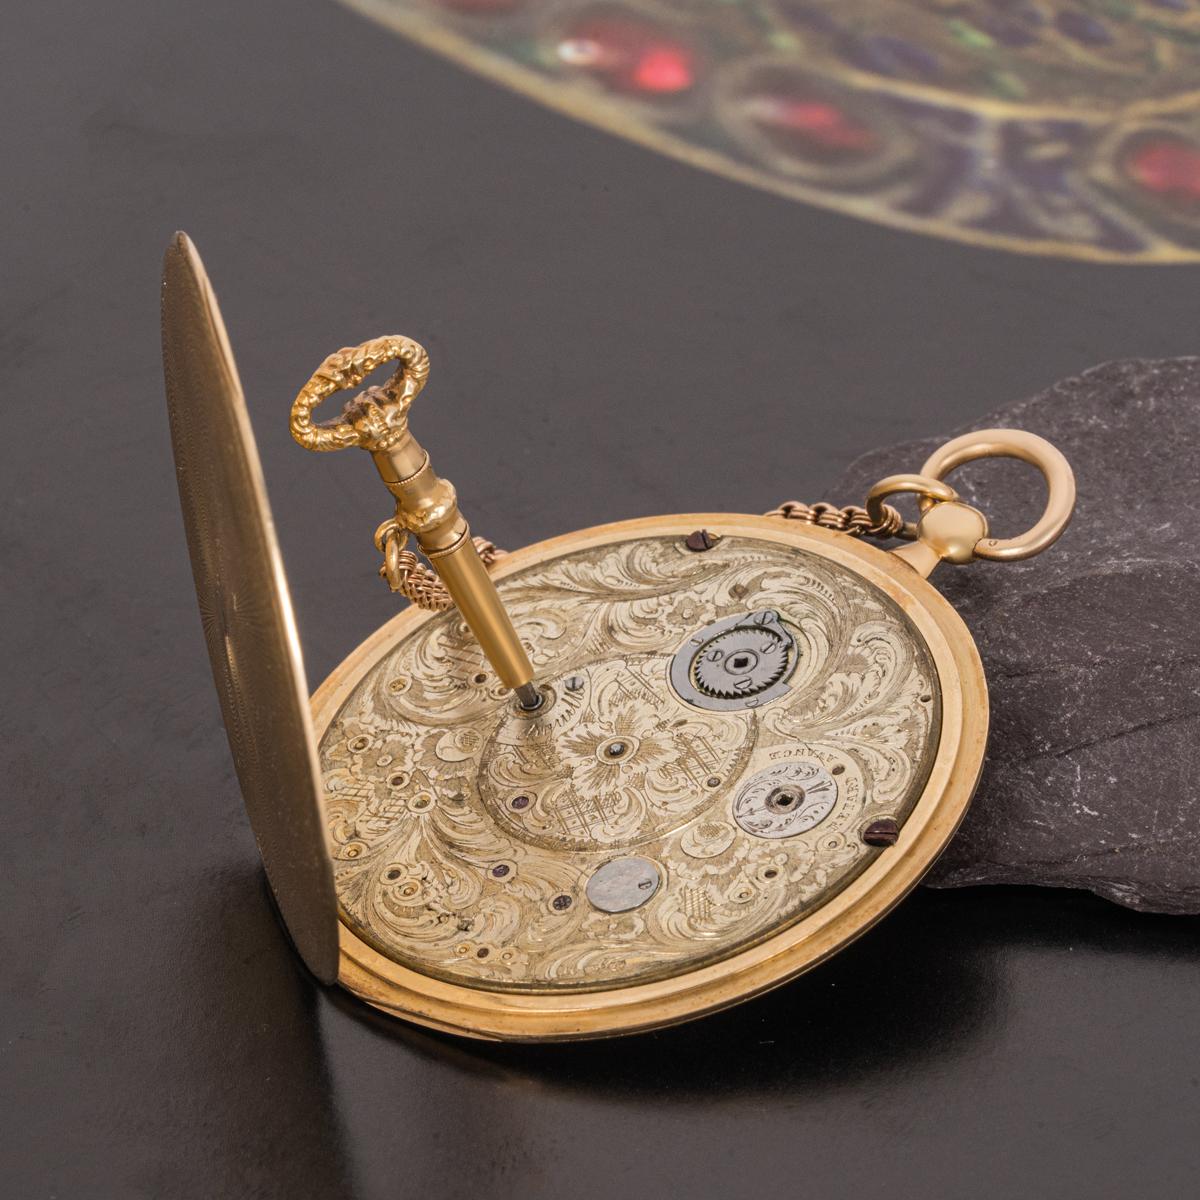 A Rare Rose Gold Extra Slim Keywind Half Hunter Pocket Watch with it's original key and it's original box C1840

Dial: The beautiful pristine condition Silver engine turned dial in the style of Breguet with Roman numerals outer minute chapter ring